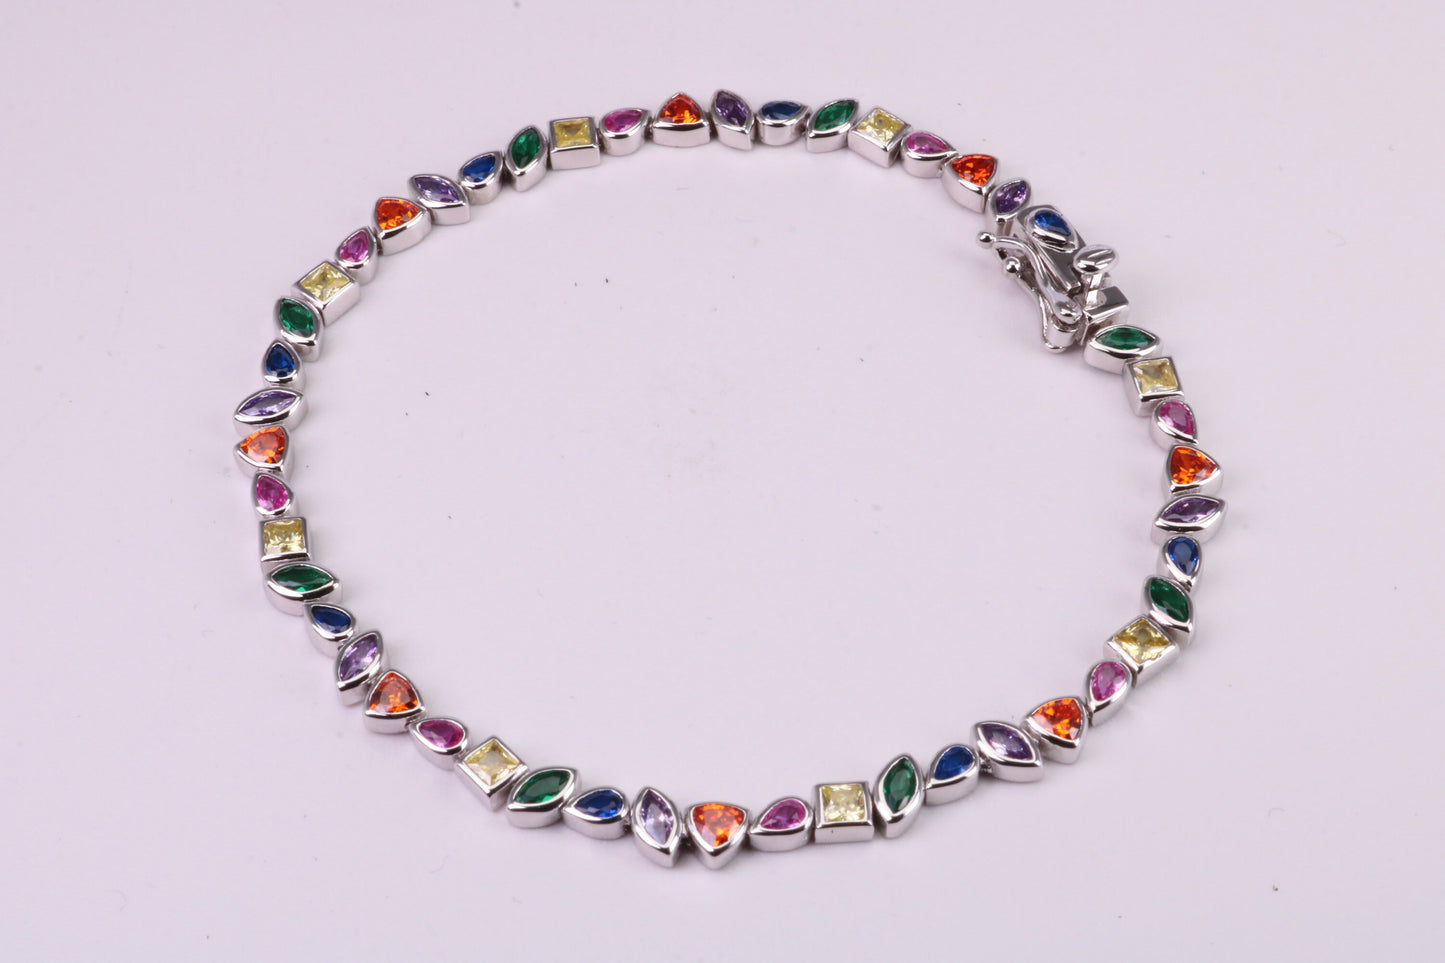 Rainbow Colour Cubic Zirconia Set Bracelet, 7.50 inch Length, Made from solid Sterling Silver